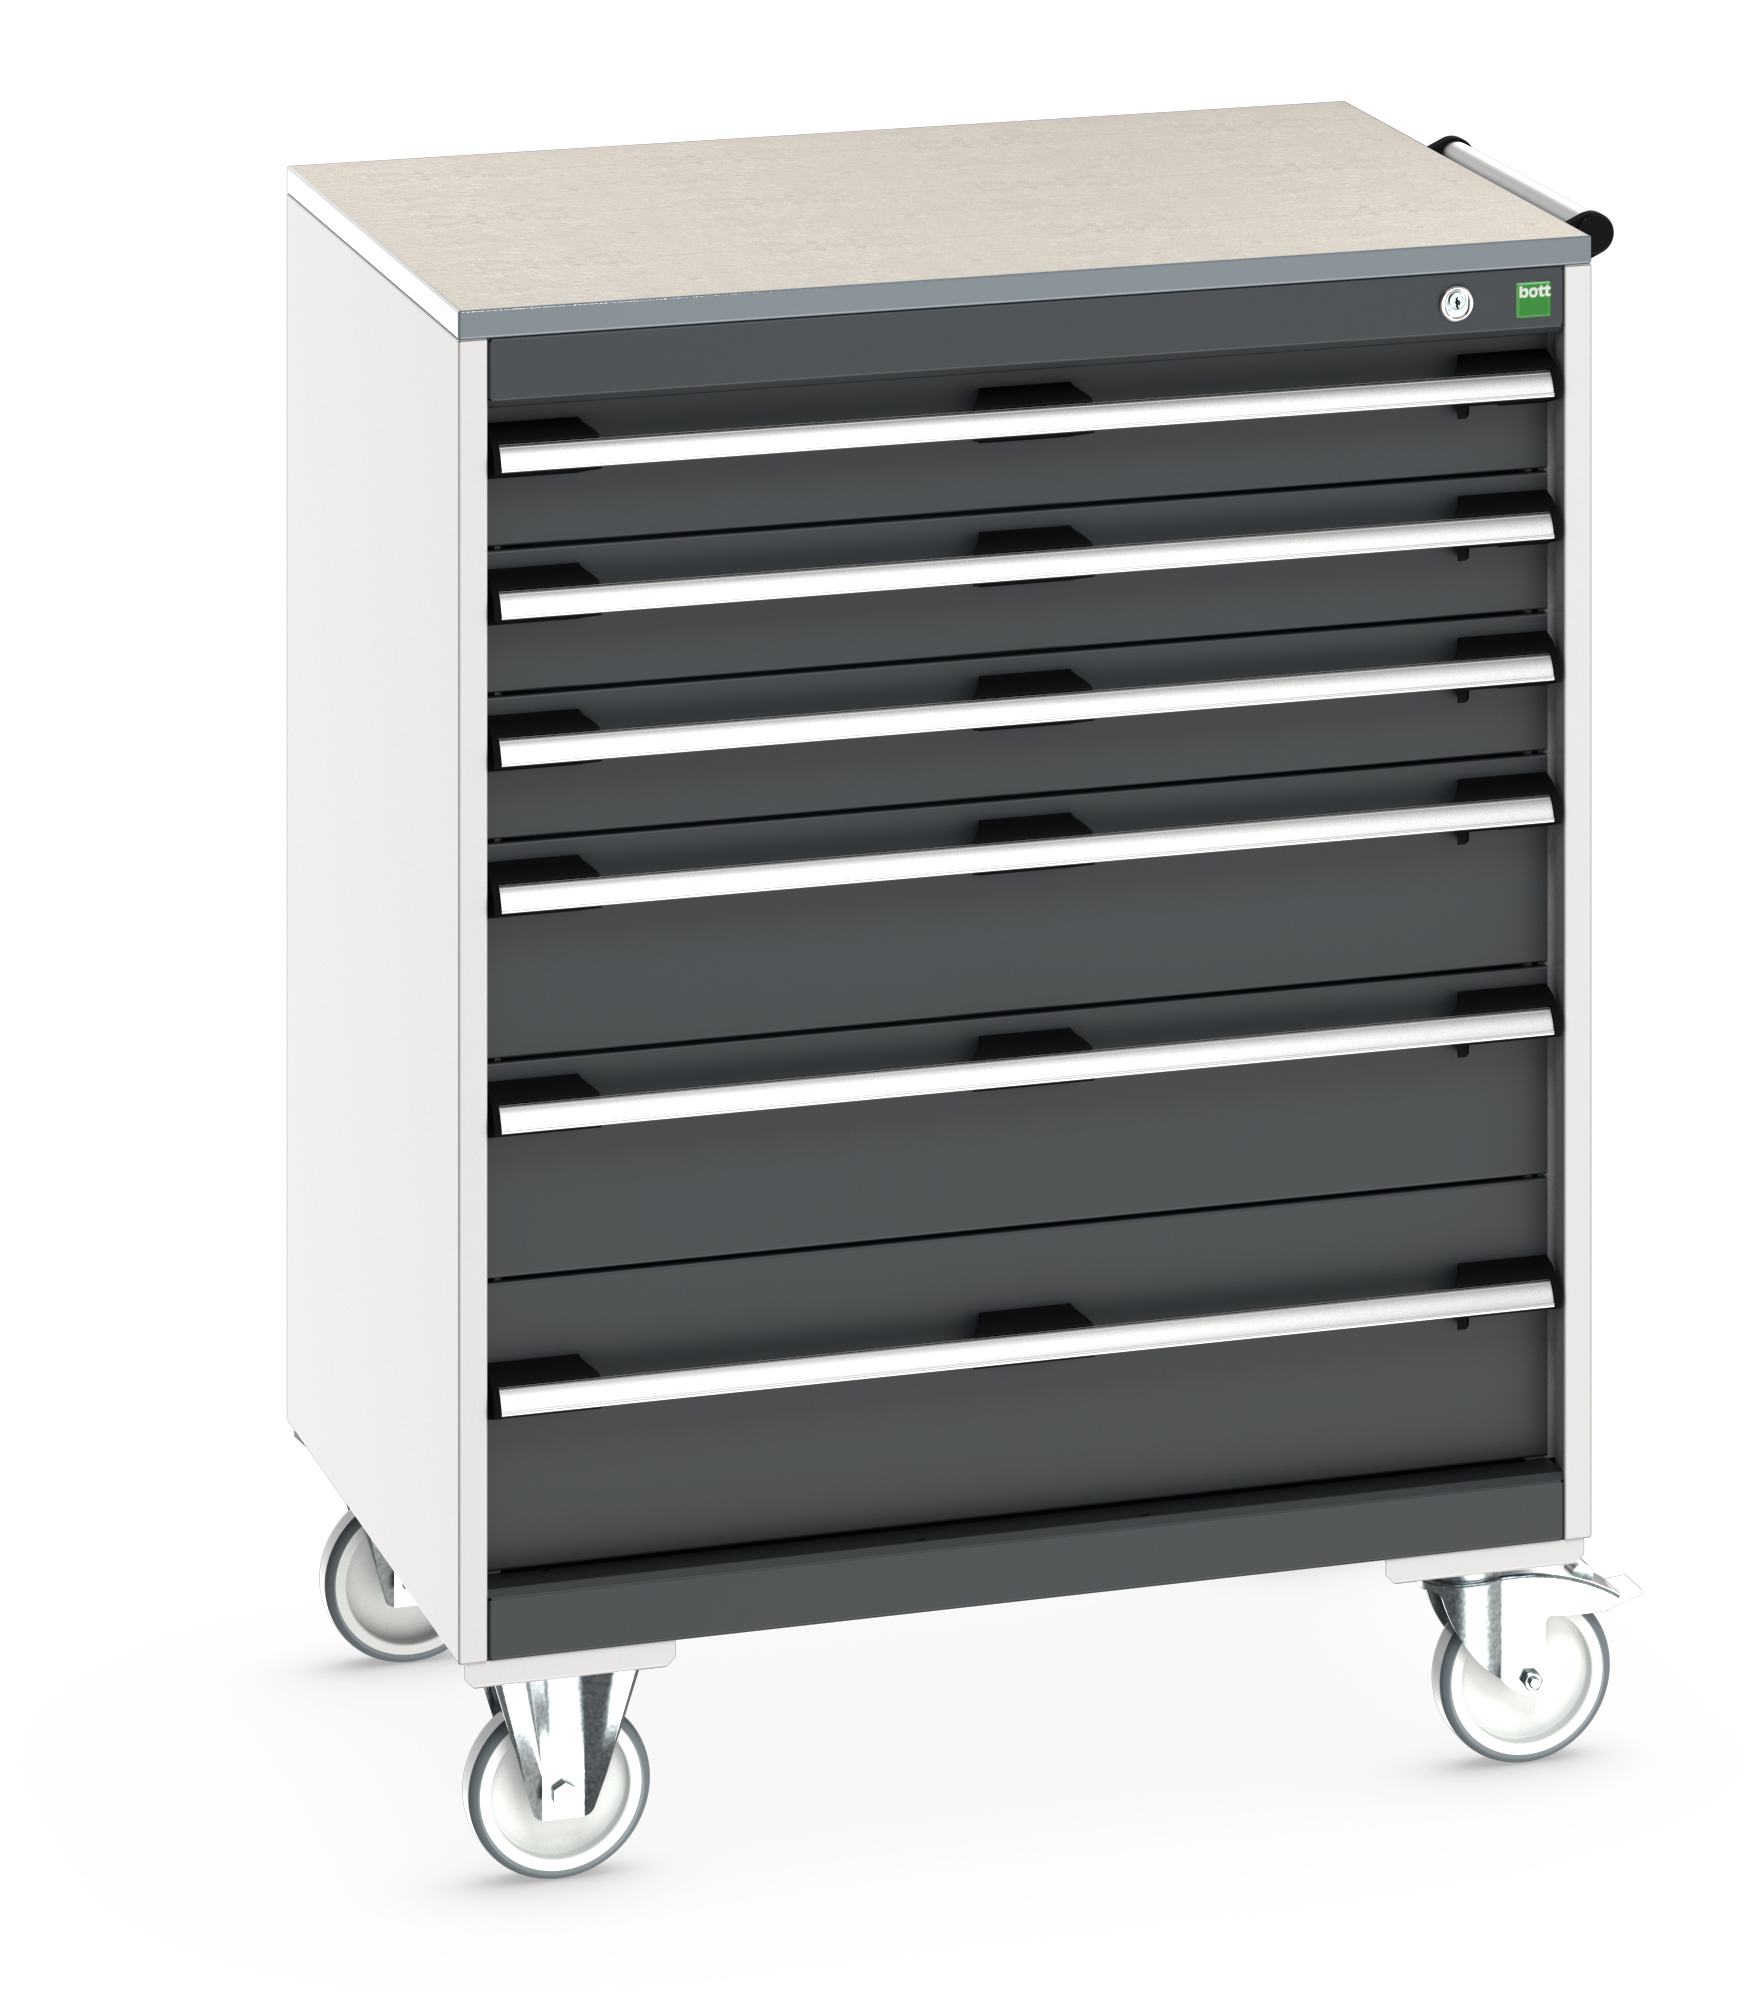 Bott Cubio Mobile Drawer Cabinet With 6 Drawers & Lino Worktop - 40402160.19V